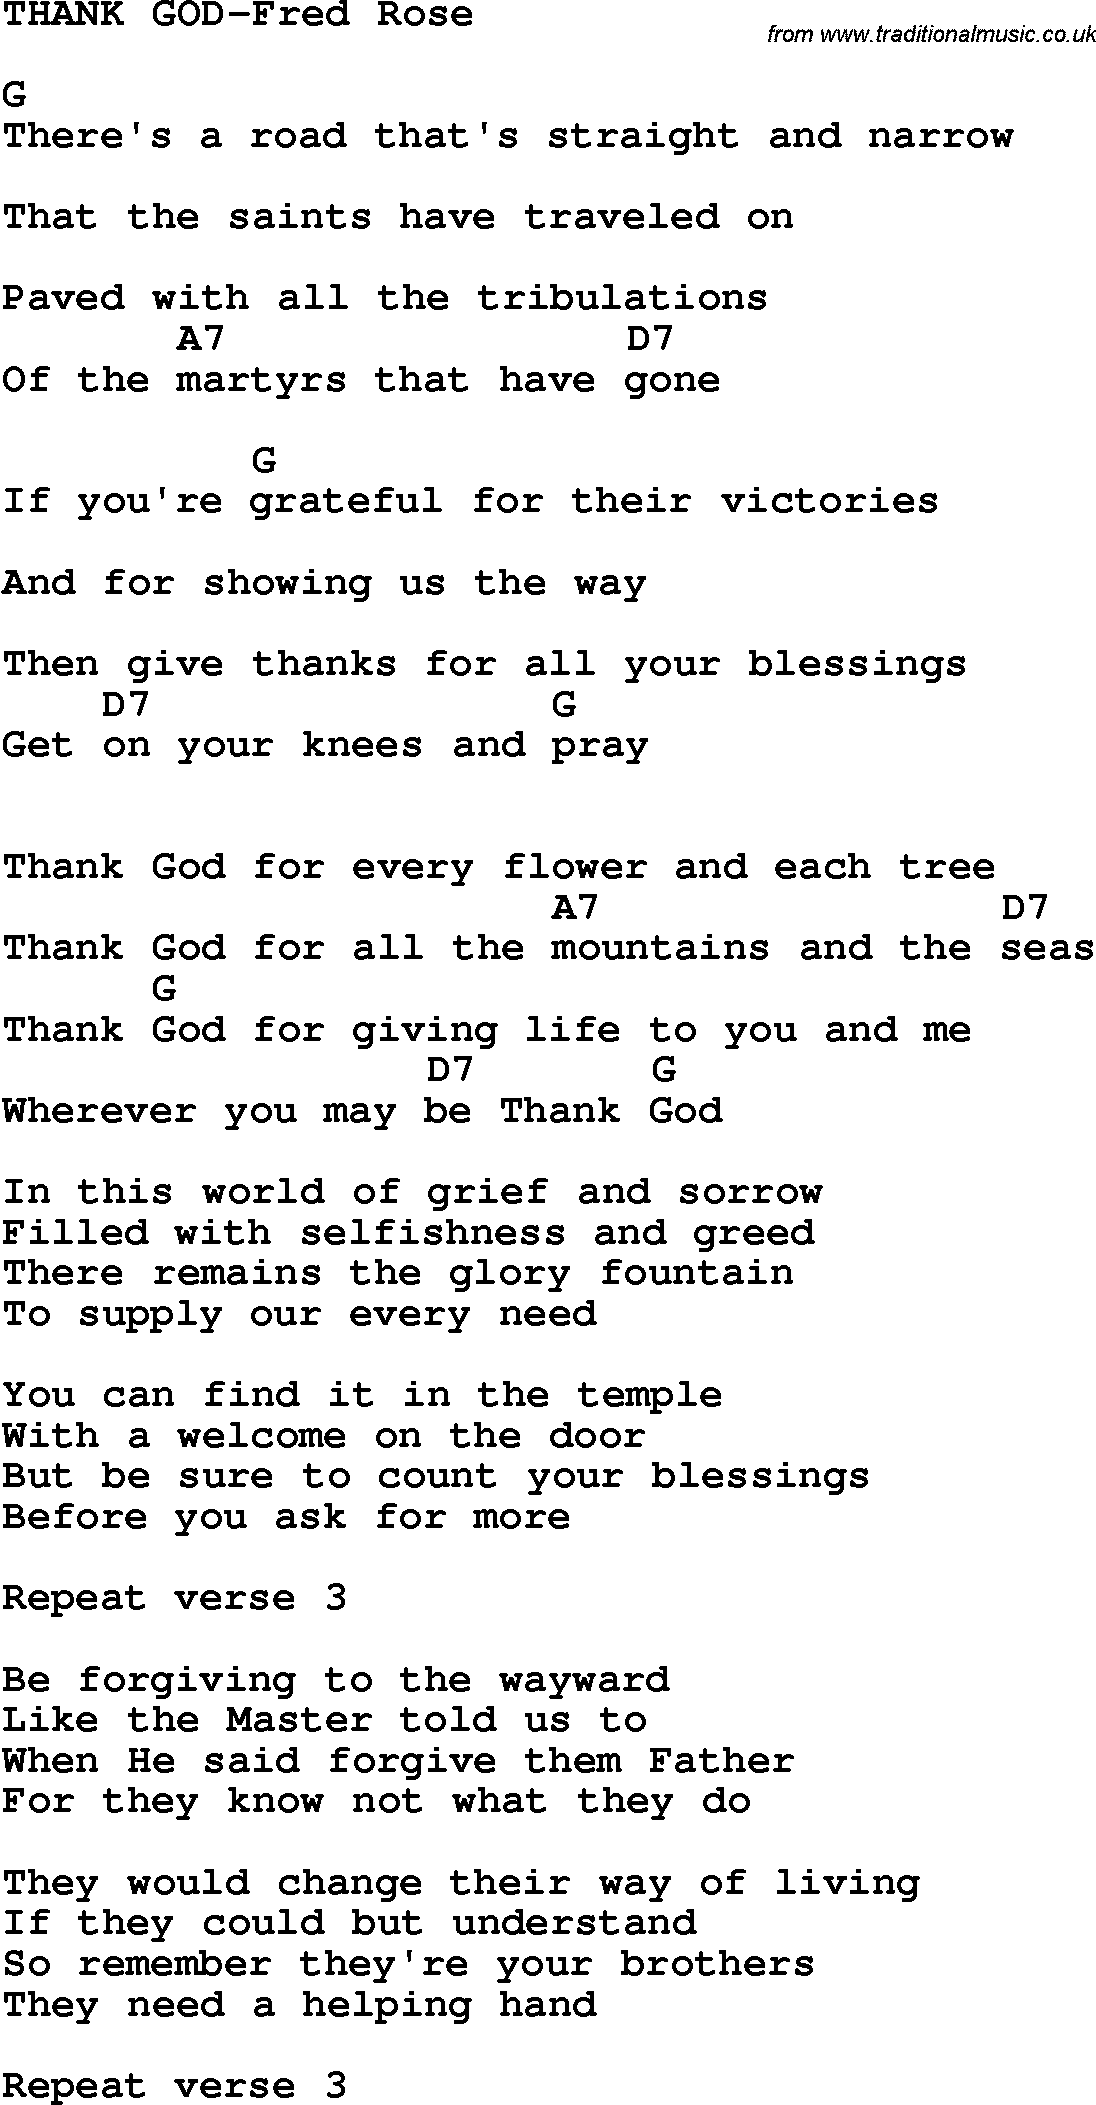 Country, Southern and Bluegrass Gospel Song THANK GOD-Fred Rose lyrics and chords